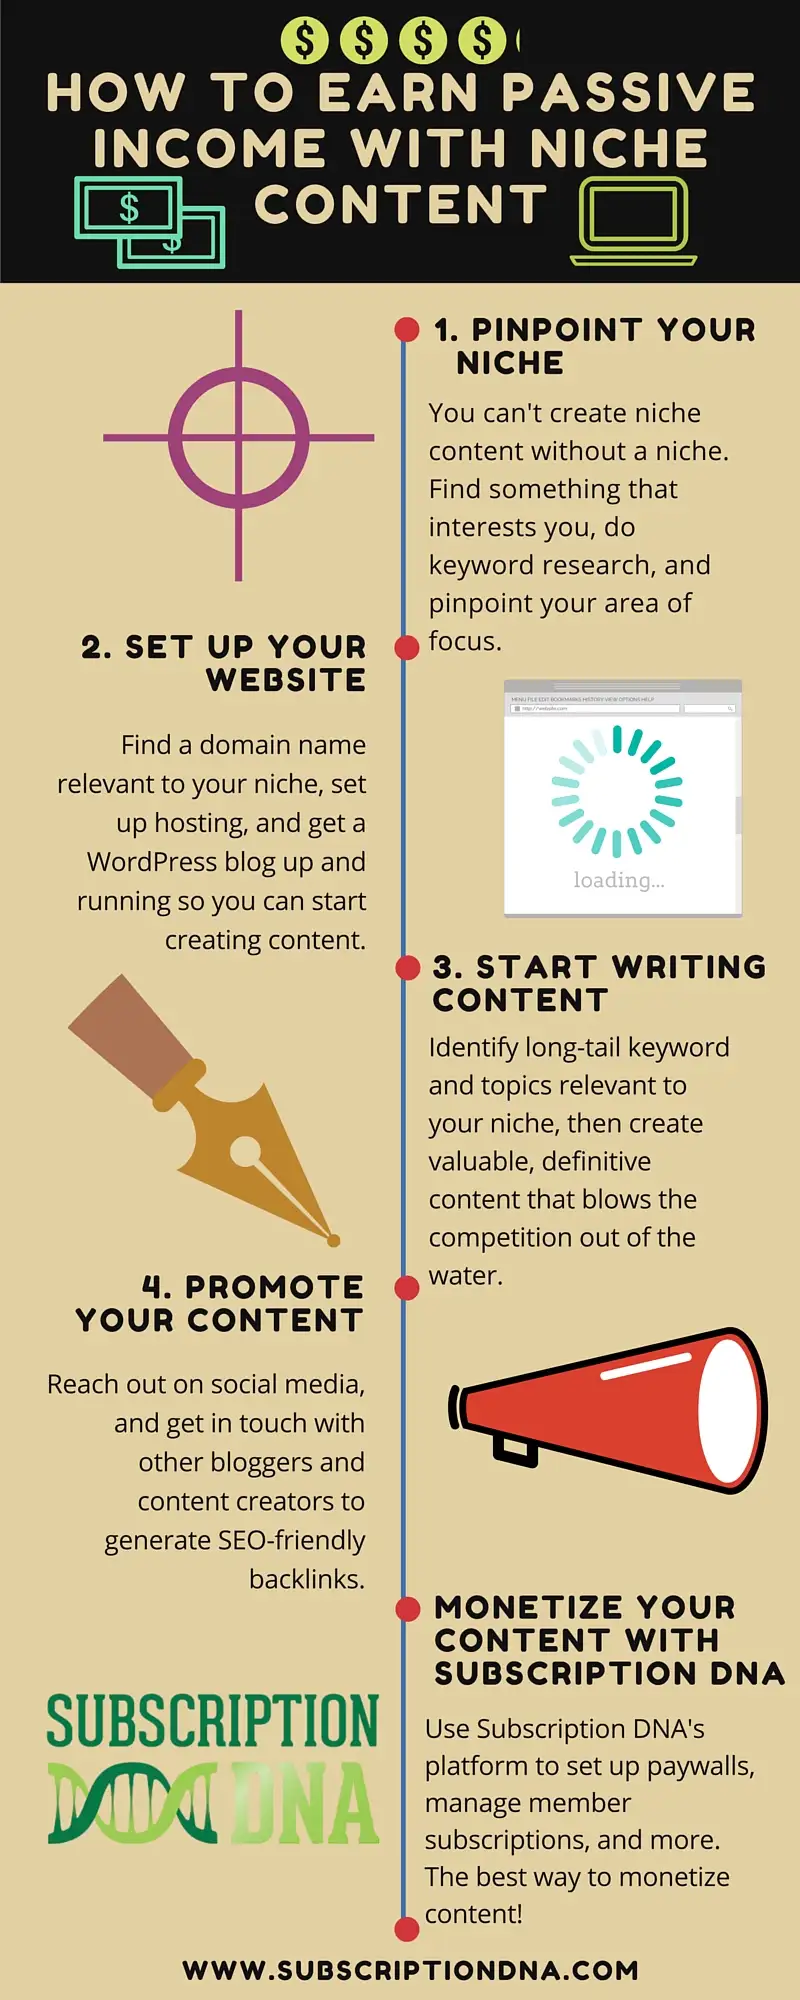 INFOGRAPHIC How to Make Passive Income with Niche Content